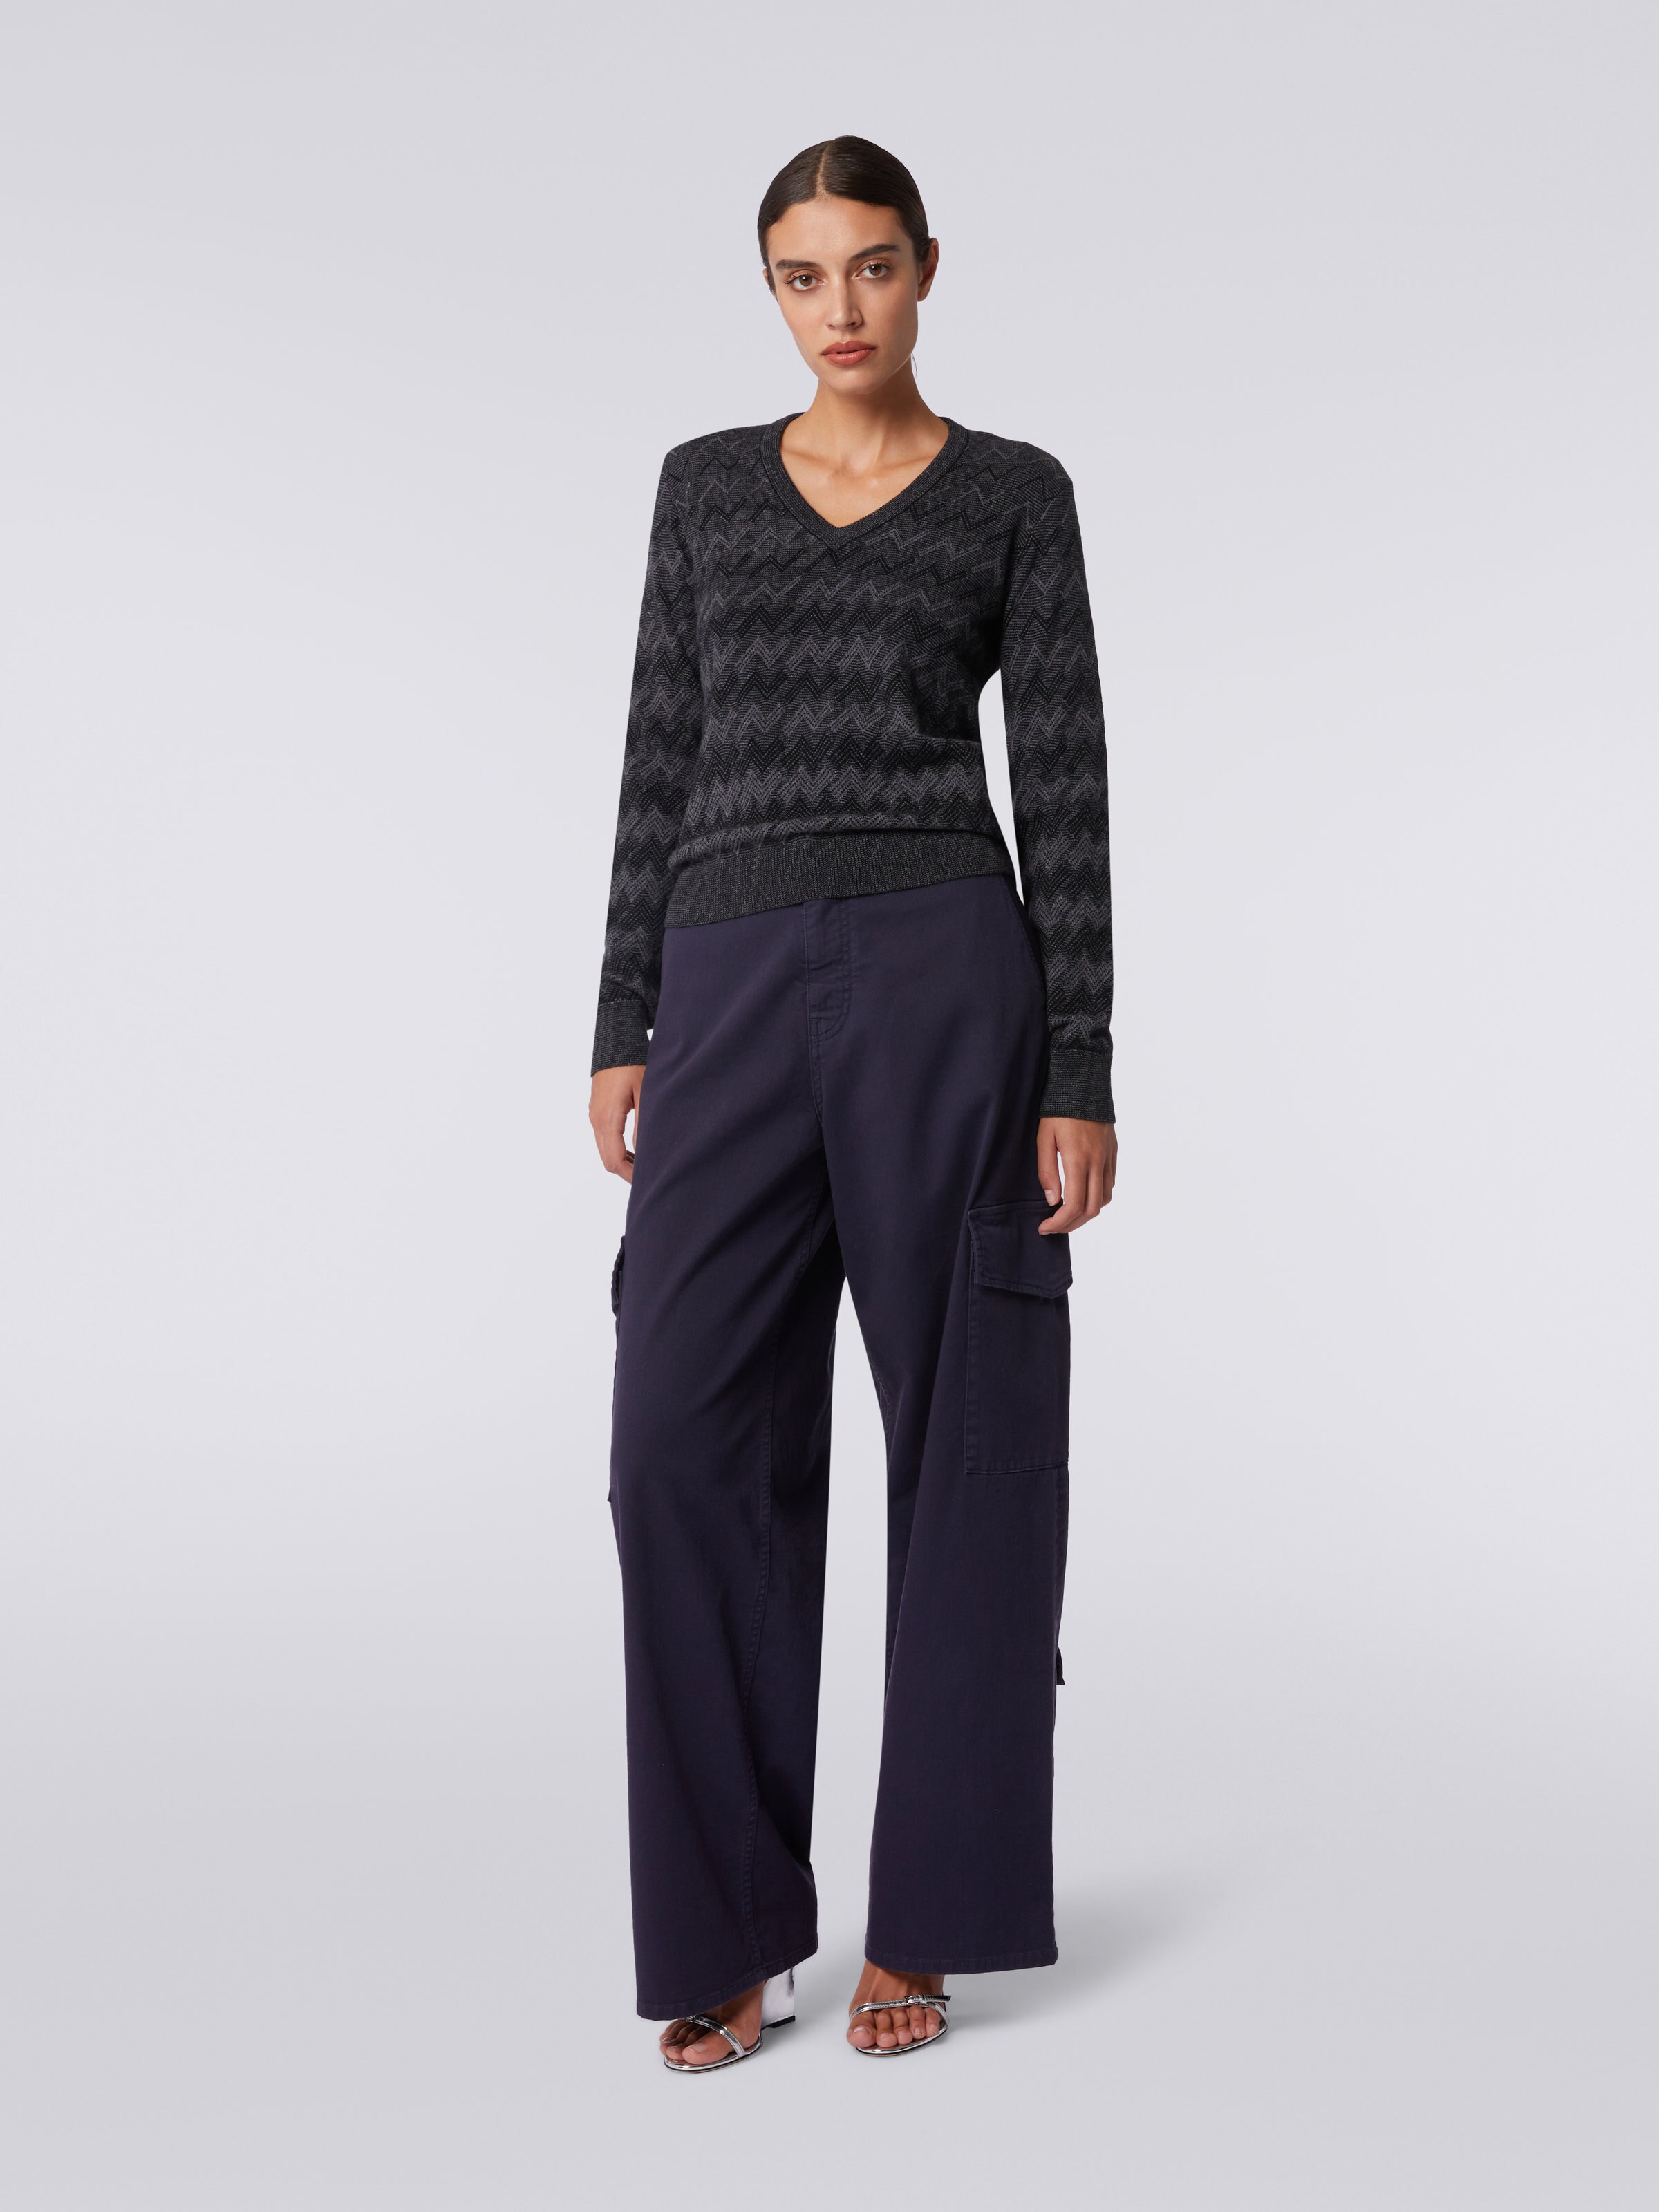 Cashmere V-neck sweater with zigzags, Black    - 1